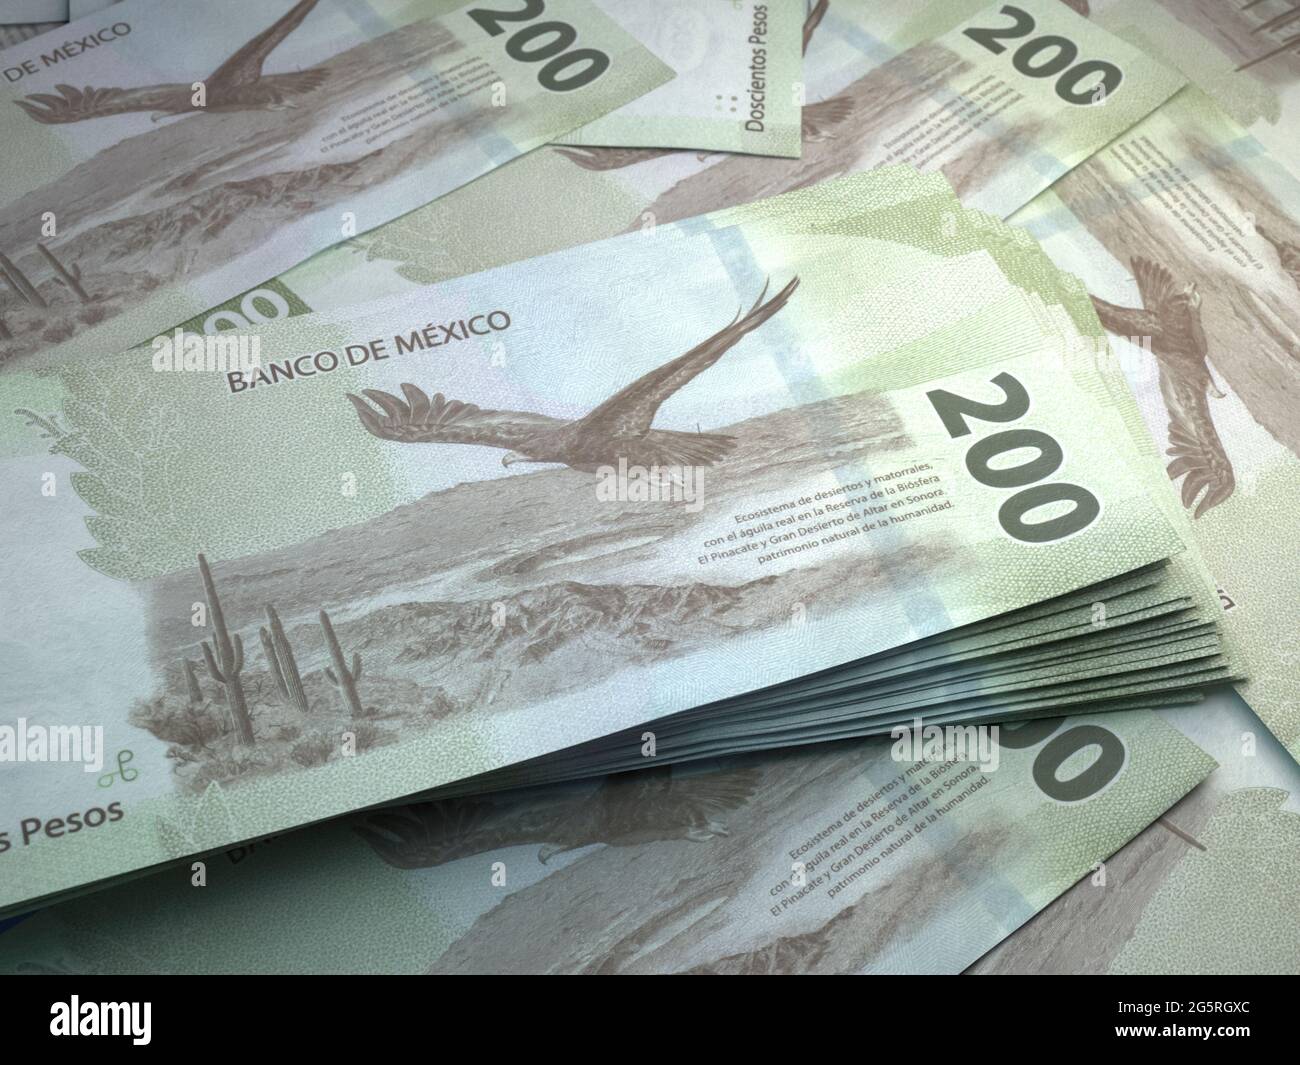 Money of Mexico. Mexican peso bills. MXN banknotes. 200 pesos. Business, finance, news background. Stock Photo